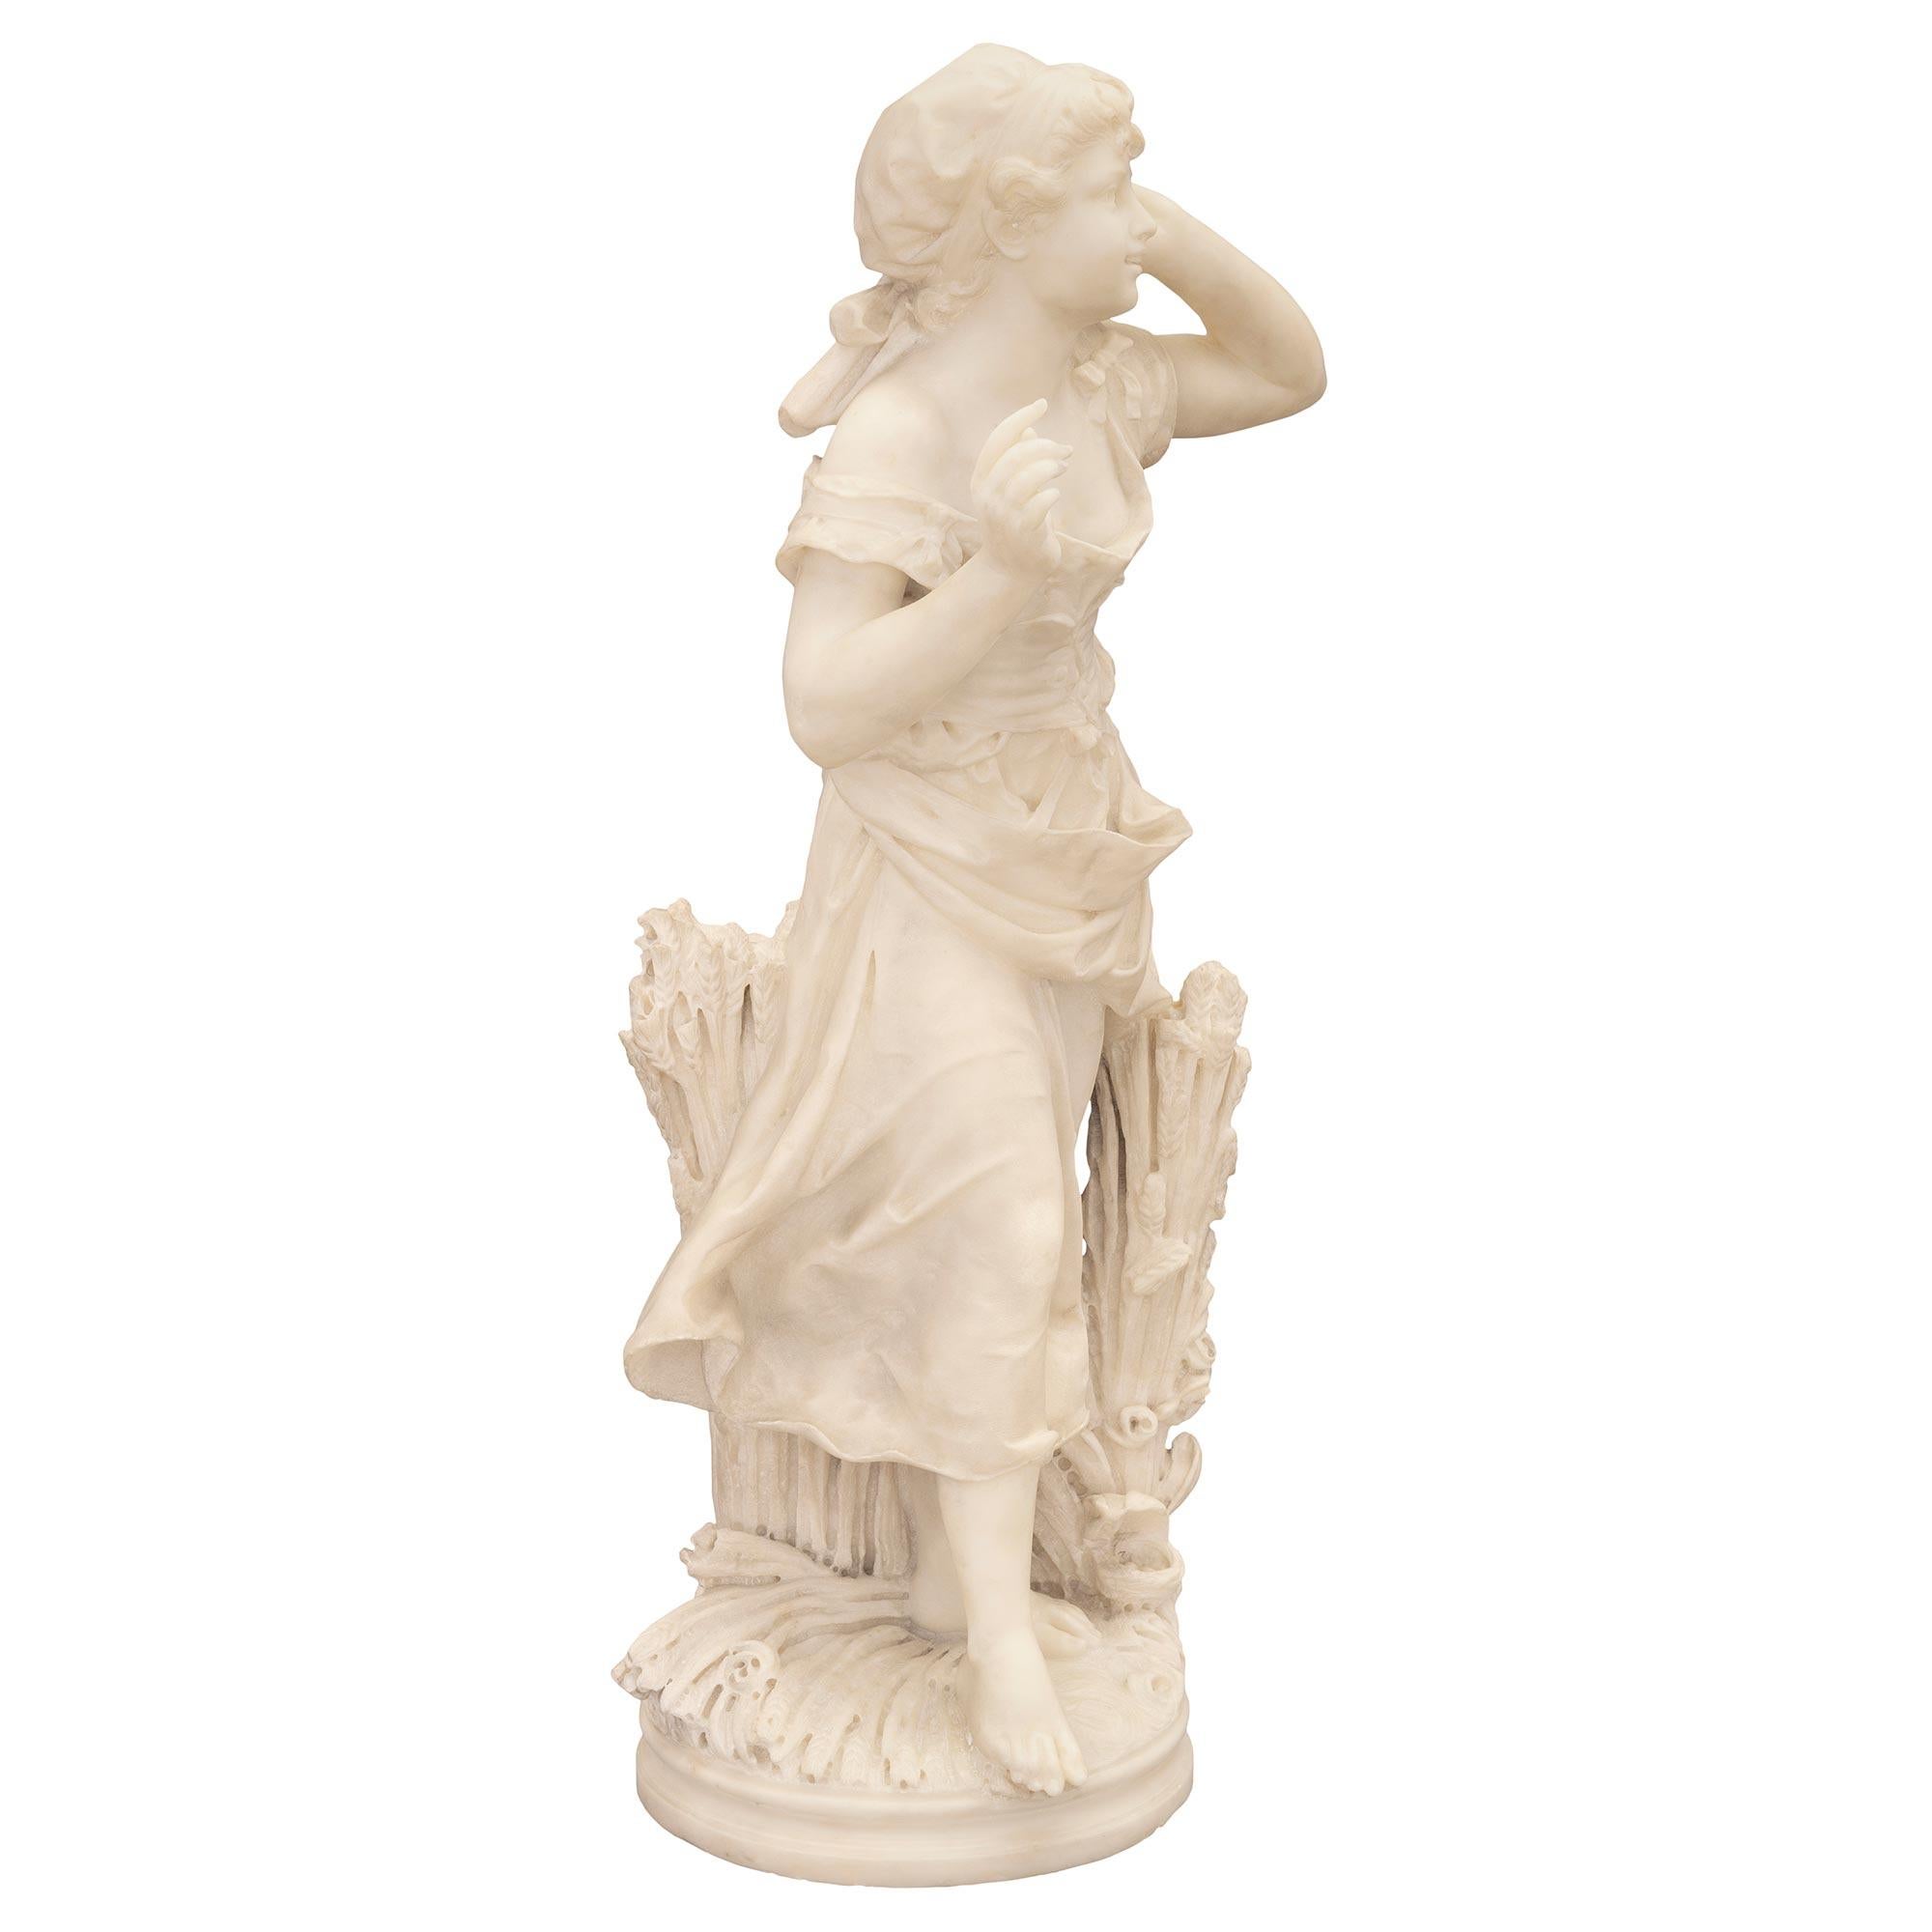 A stunning and masterfully executed Italian 19th century white Carrara marble statue of a young maiden in a wheat field. The statue is raised by an elegant circular base with a fine mottled border. Above is a beautiful young maiden dressed in a